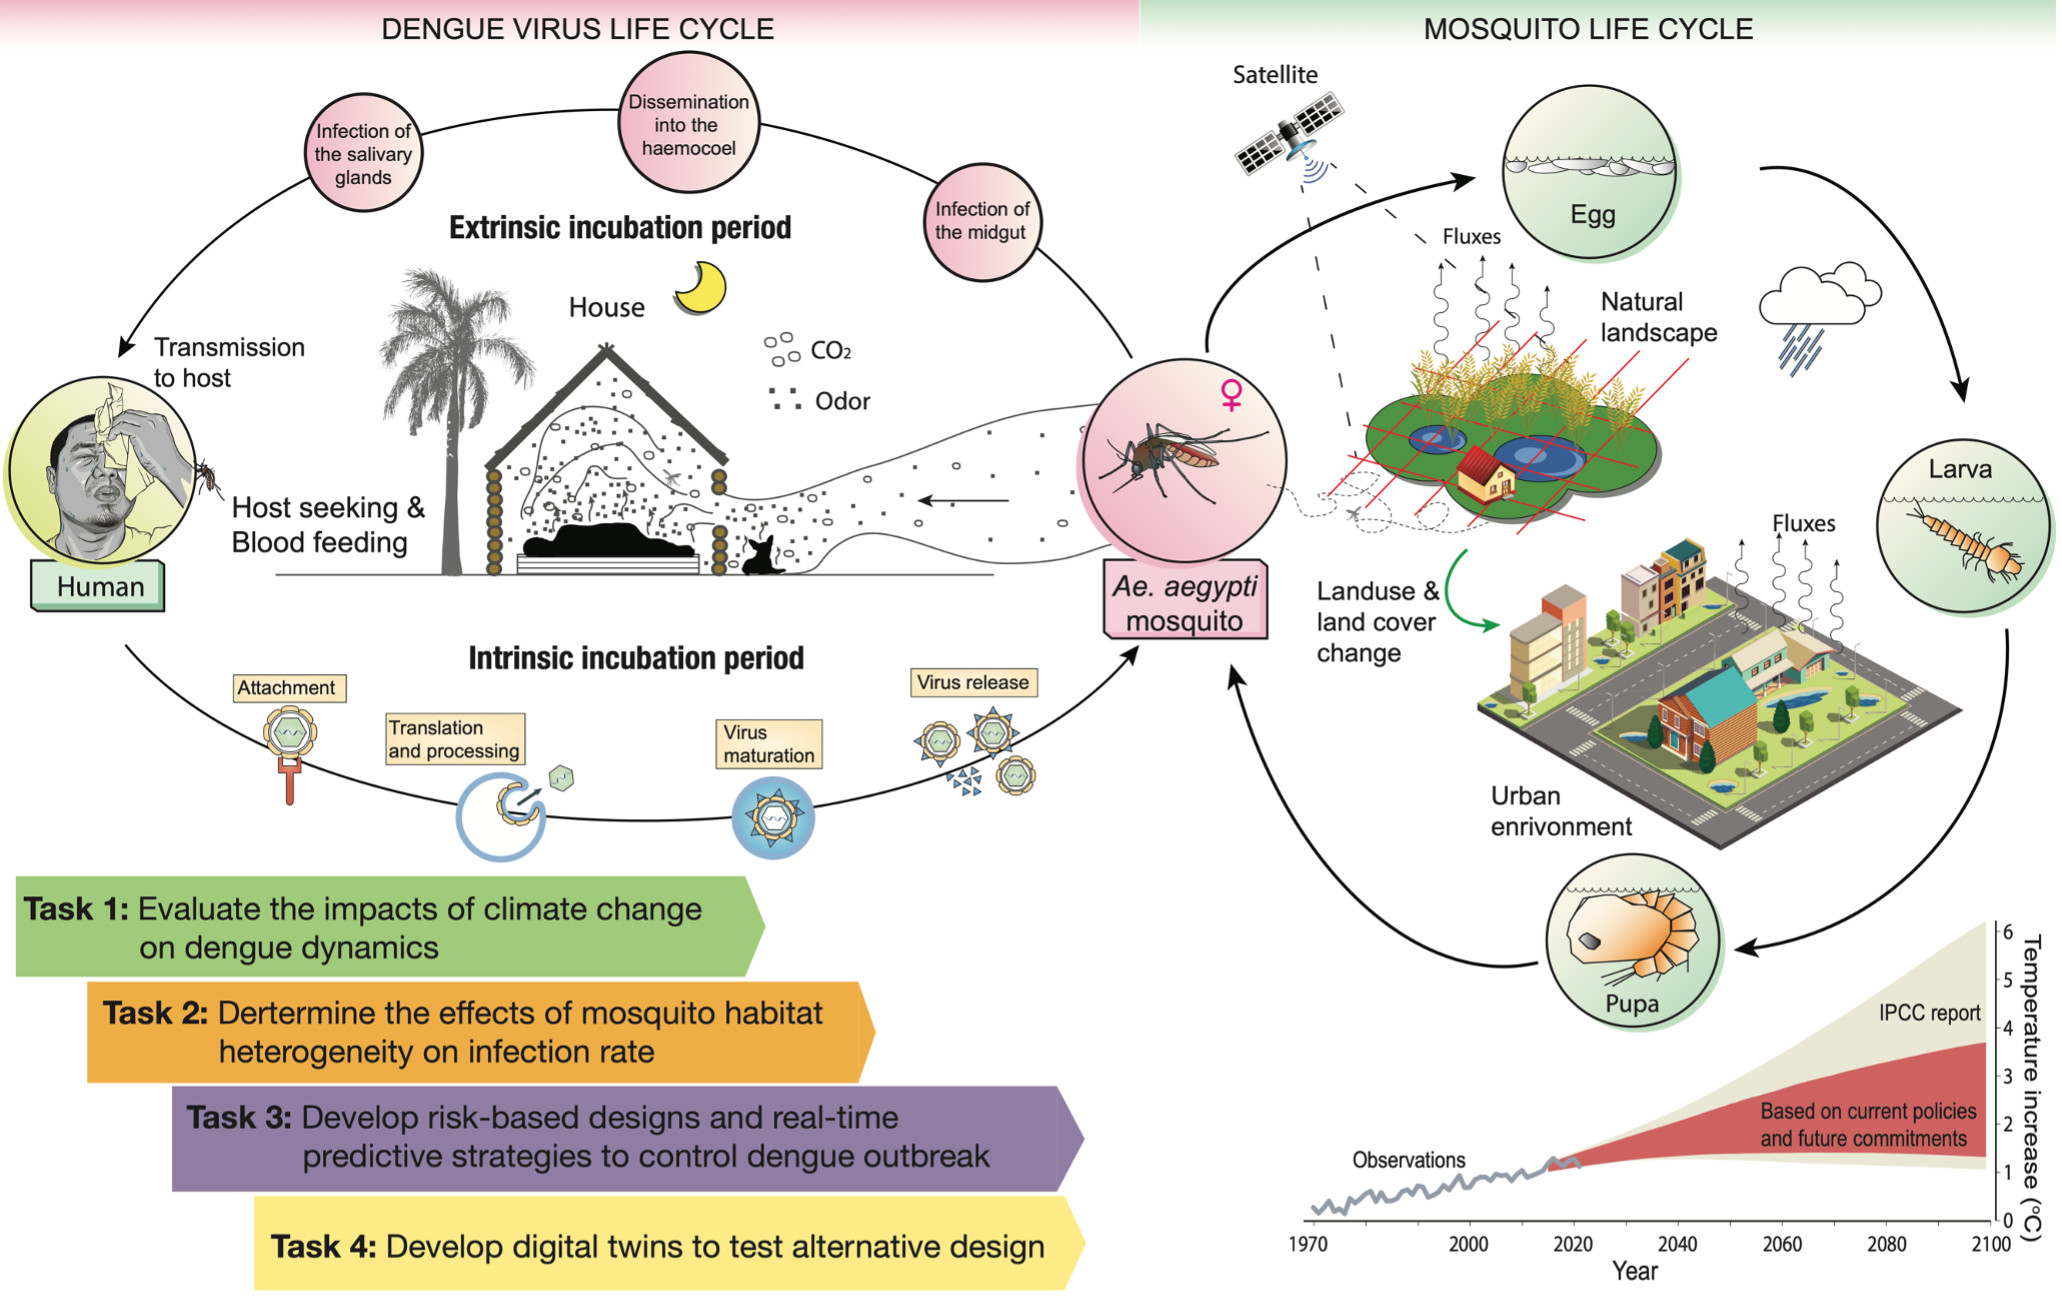 Envisioning Urban Environments Resilient to Vector-Borne Diseases: A One Health Approach to Dengue Management